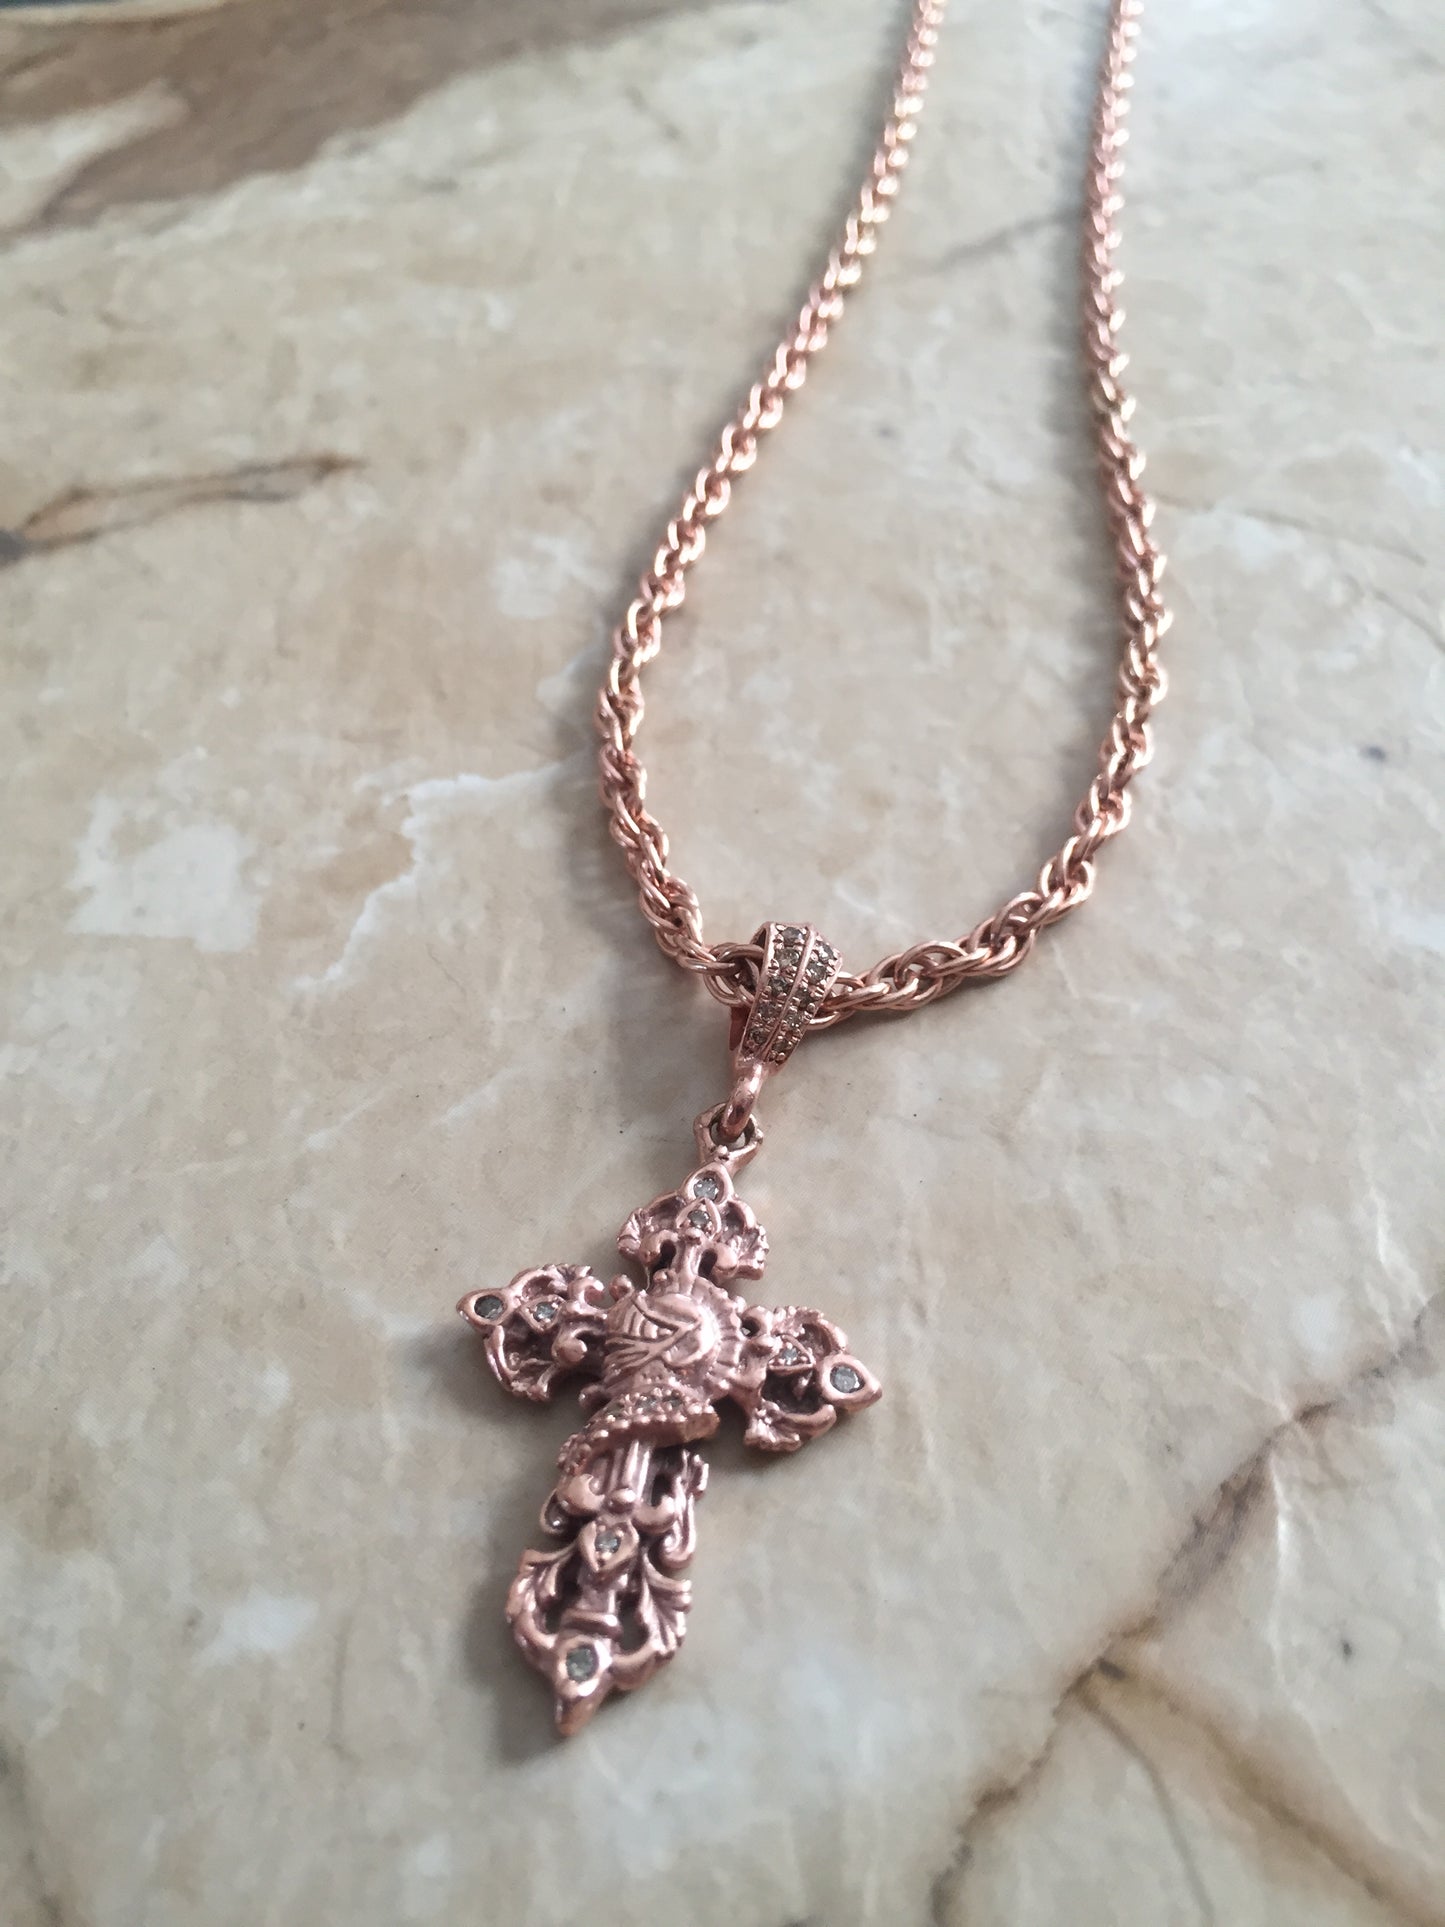 Necklace - Rosegold Silver Knight Cross